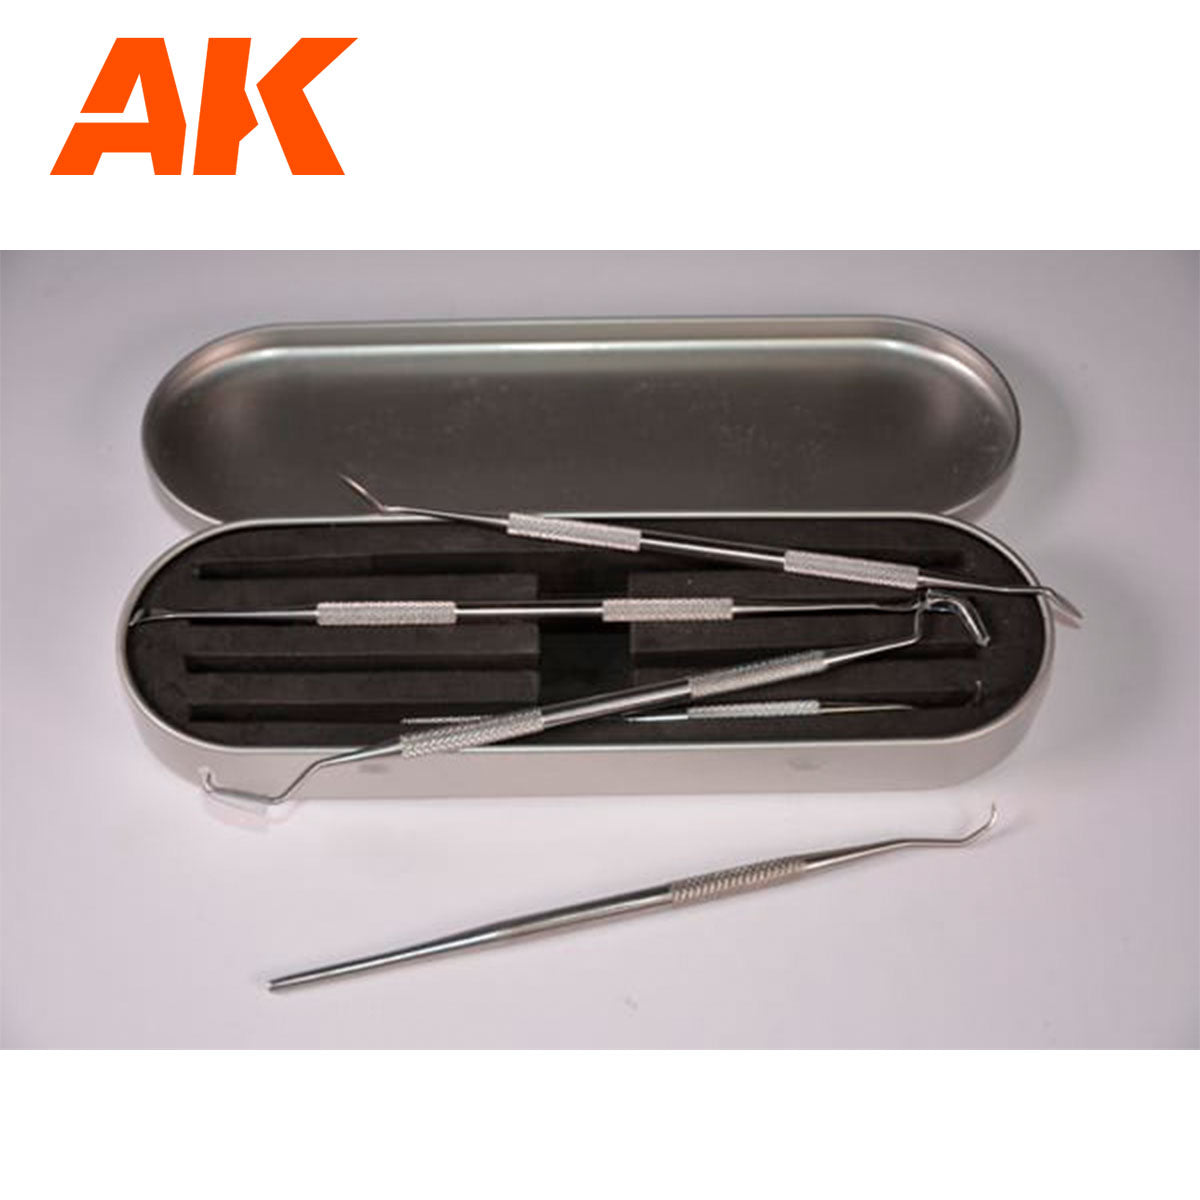 AK Interactive Carving Tools Box AK9005 - Loaded Dice Barry Vale of Glamorgan CF64 3HD